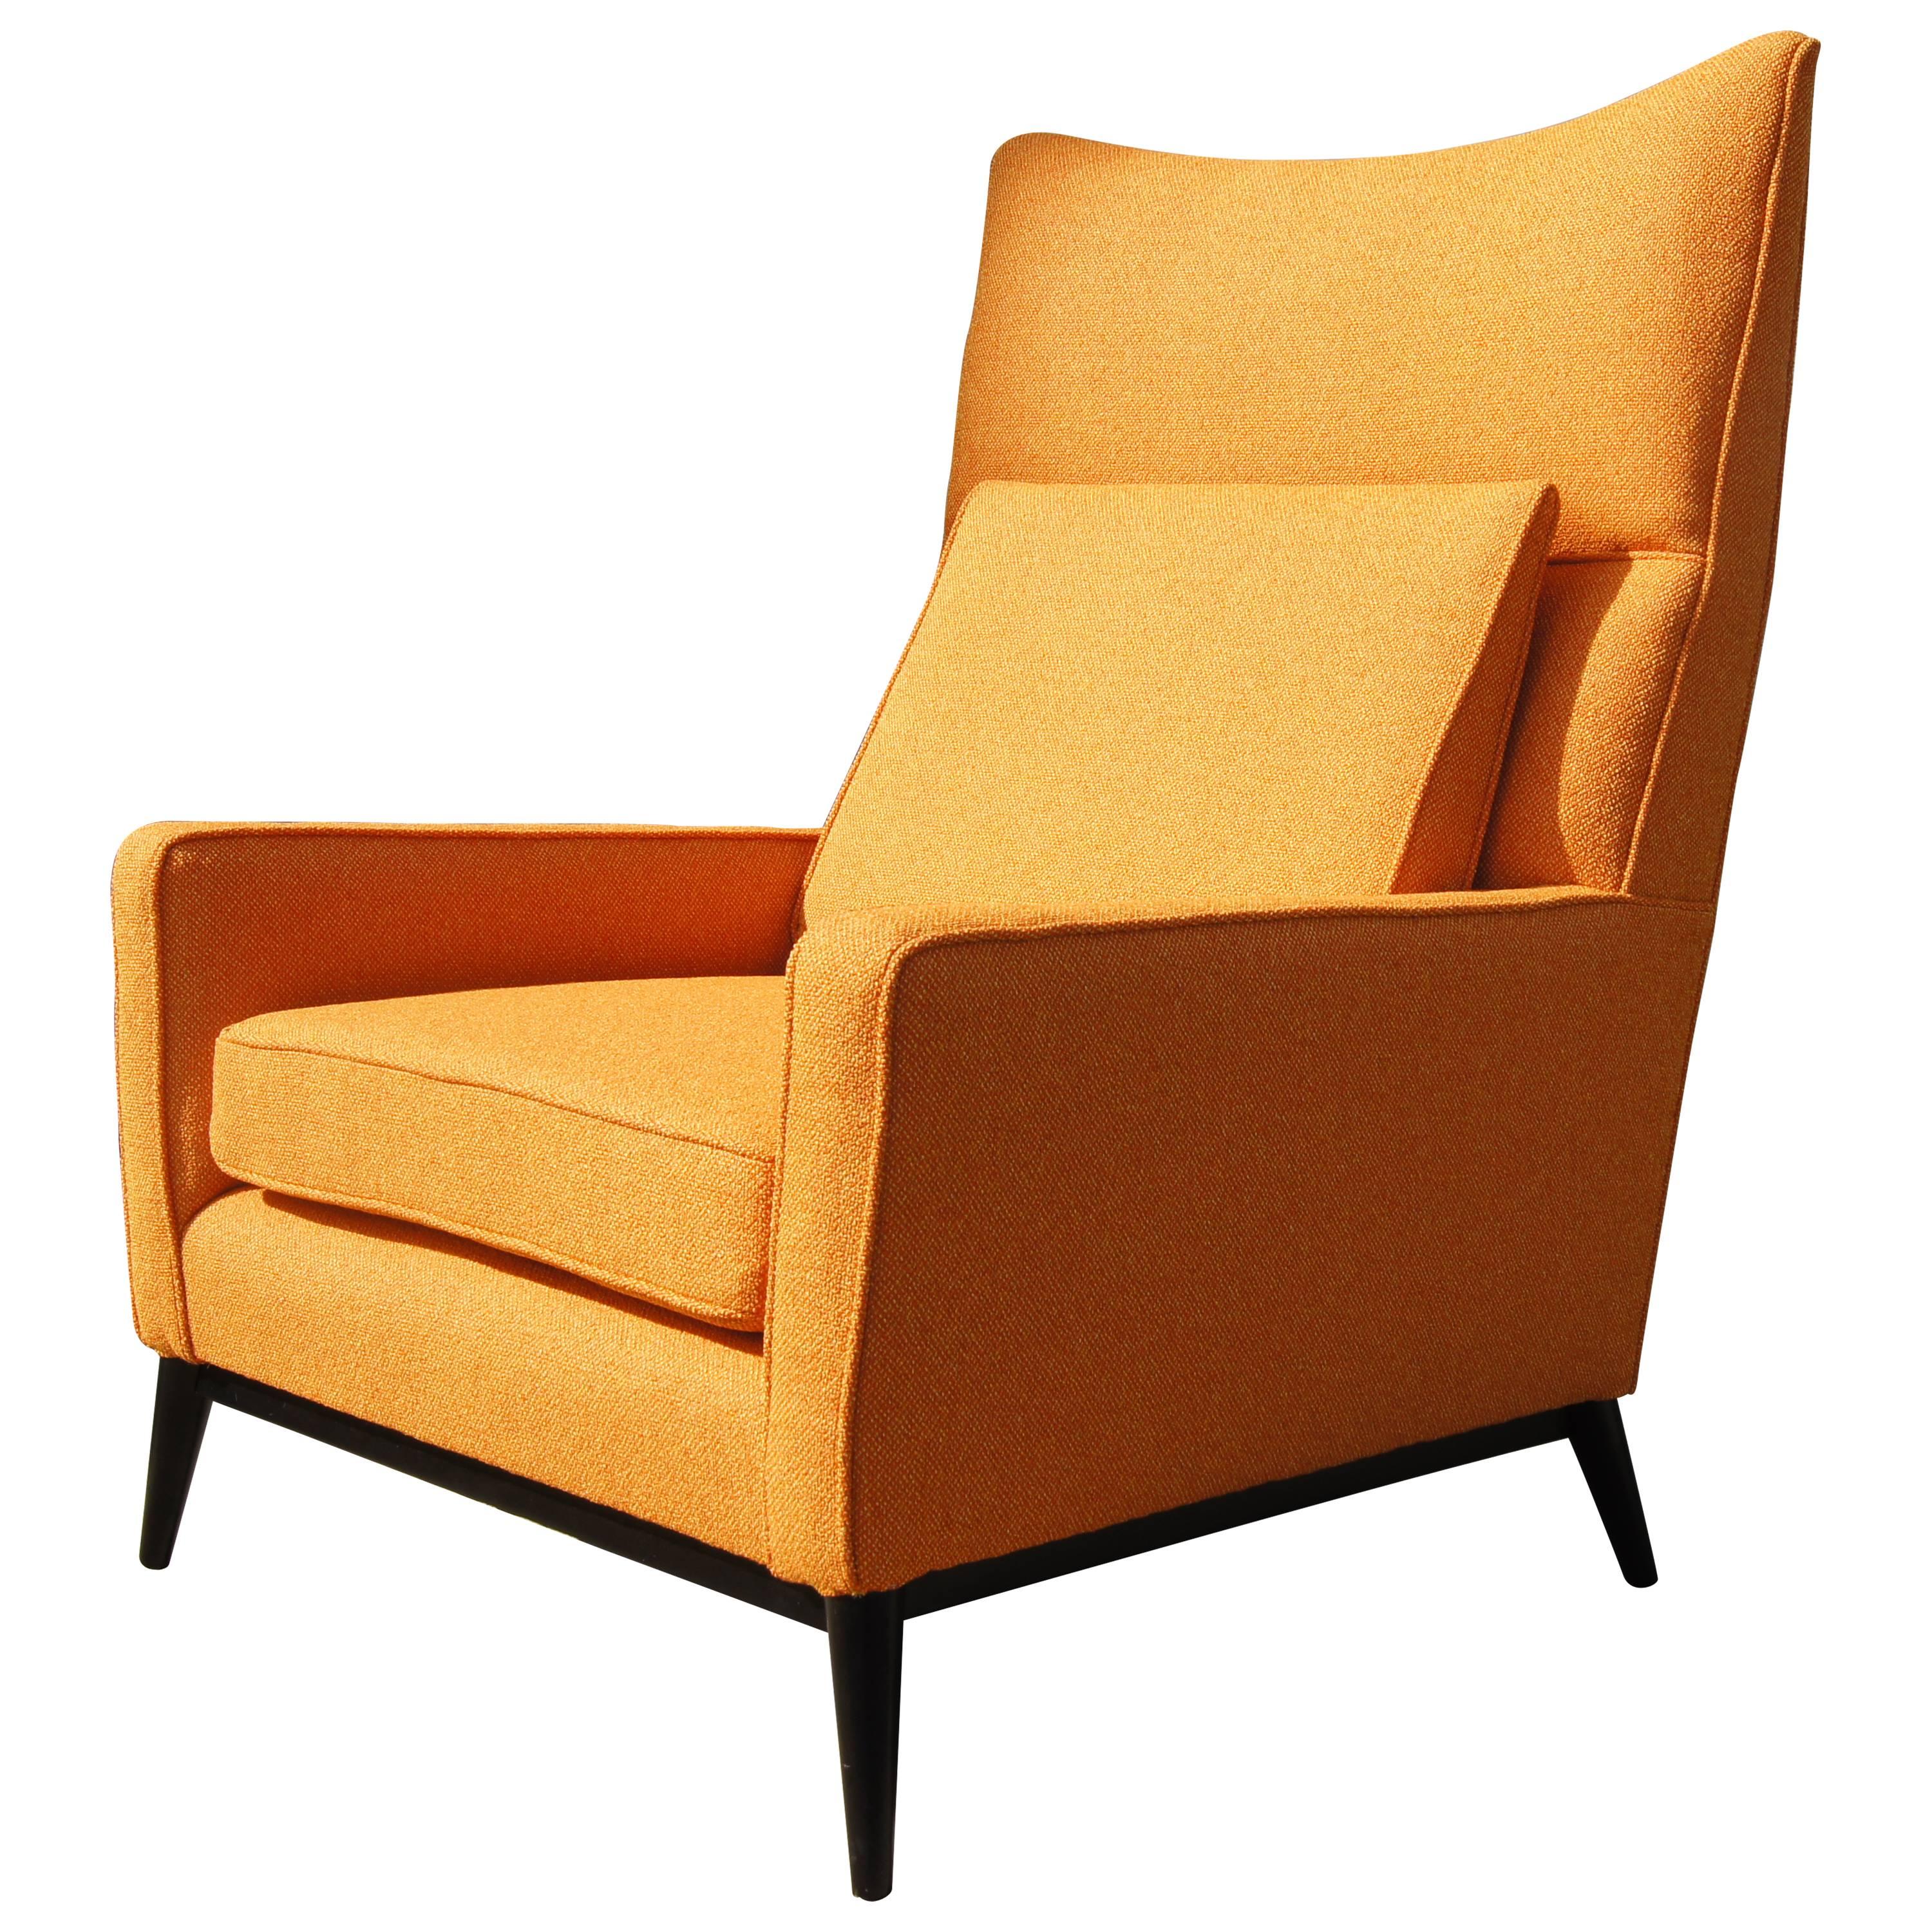 High-Back Lounge Chair, Model 314, by Paul McCobb for Directional